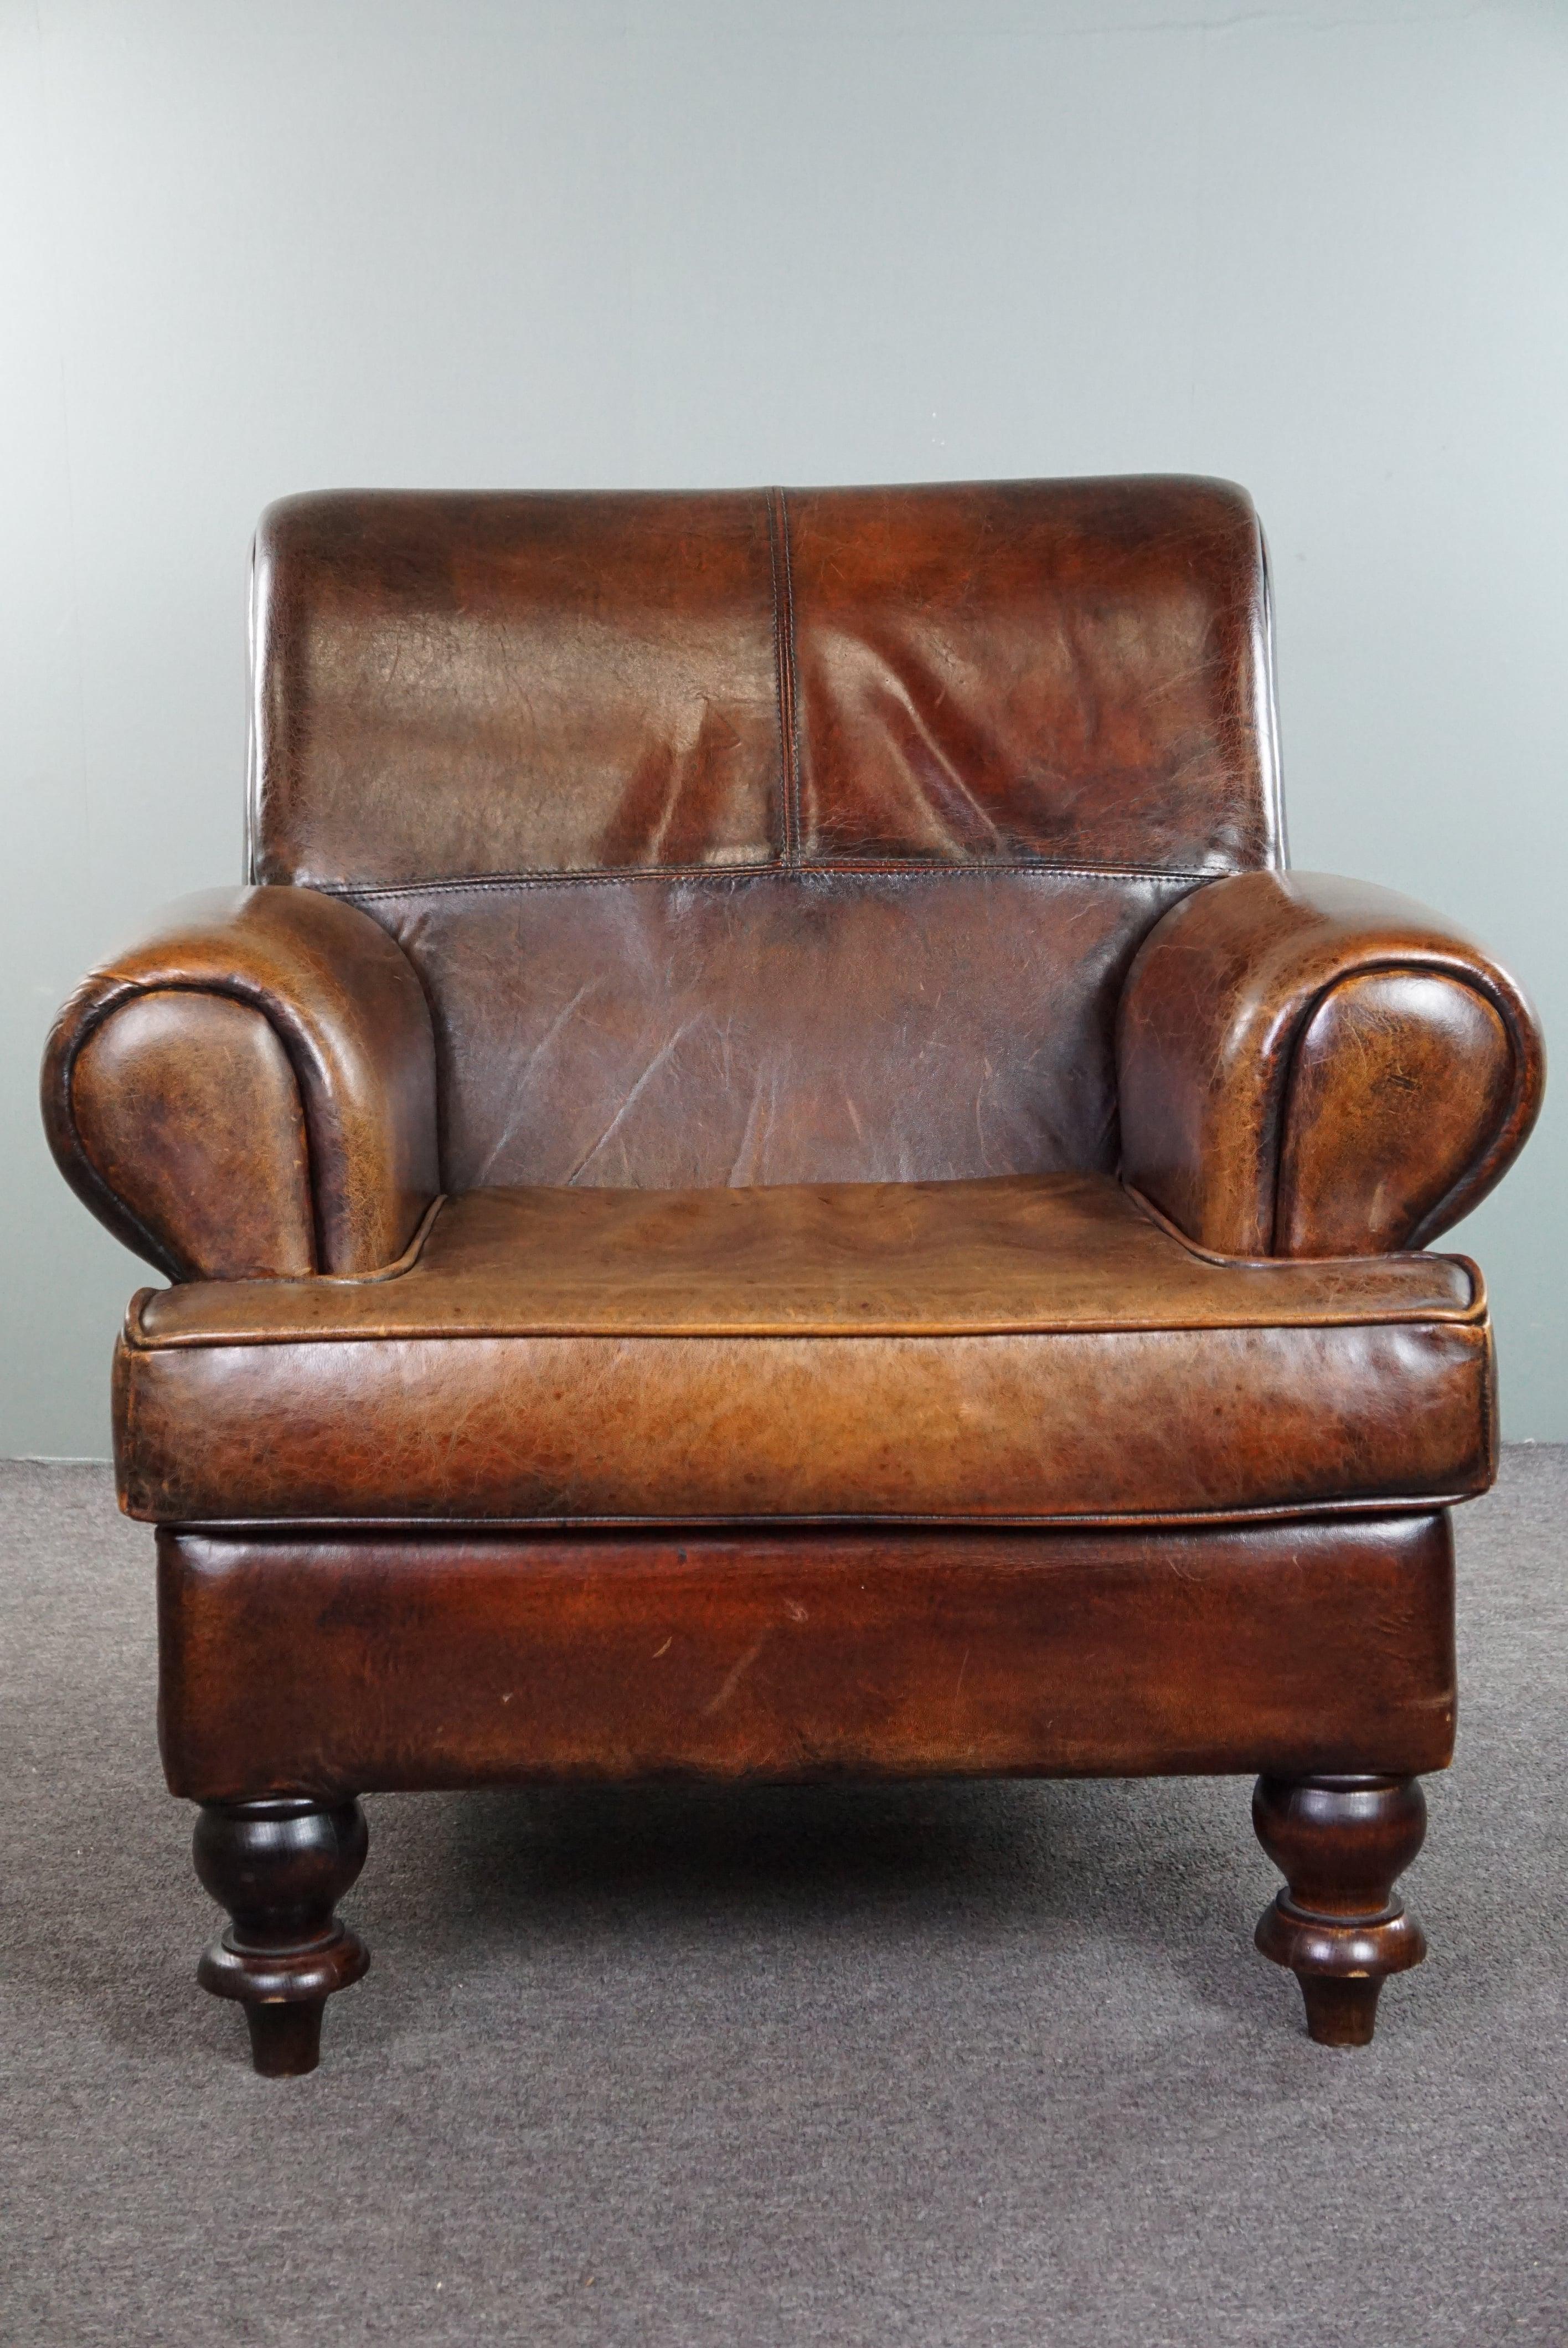 Offered is this generous sheepskin armchair with a relaxed deep seat and a beautiful patina. 

With this sheepskin armchair, you are acquiring a delightful all-rounder. It will embrace your interior and immediately feel at home. It is generous in